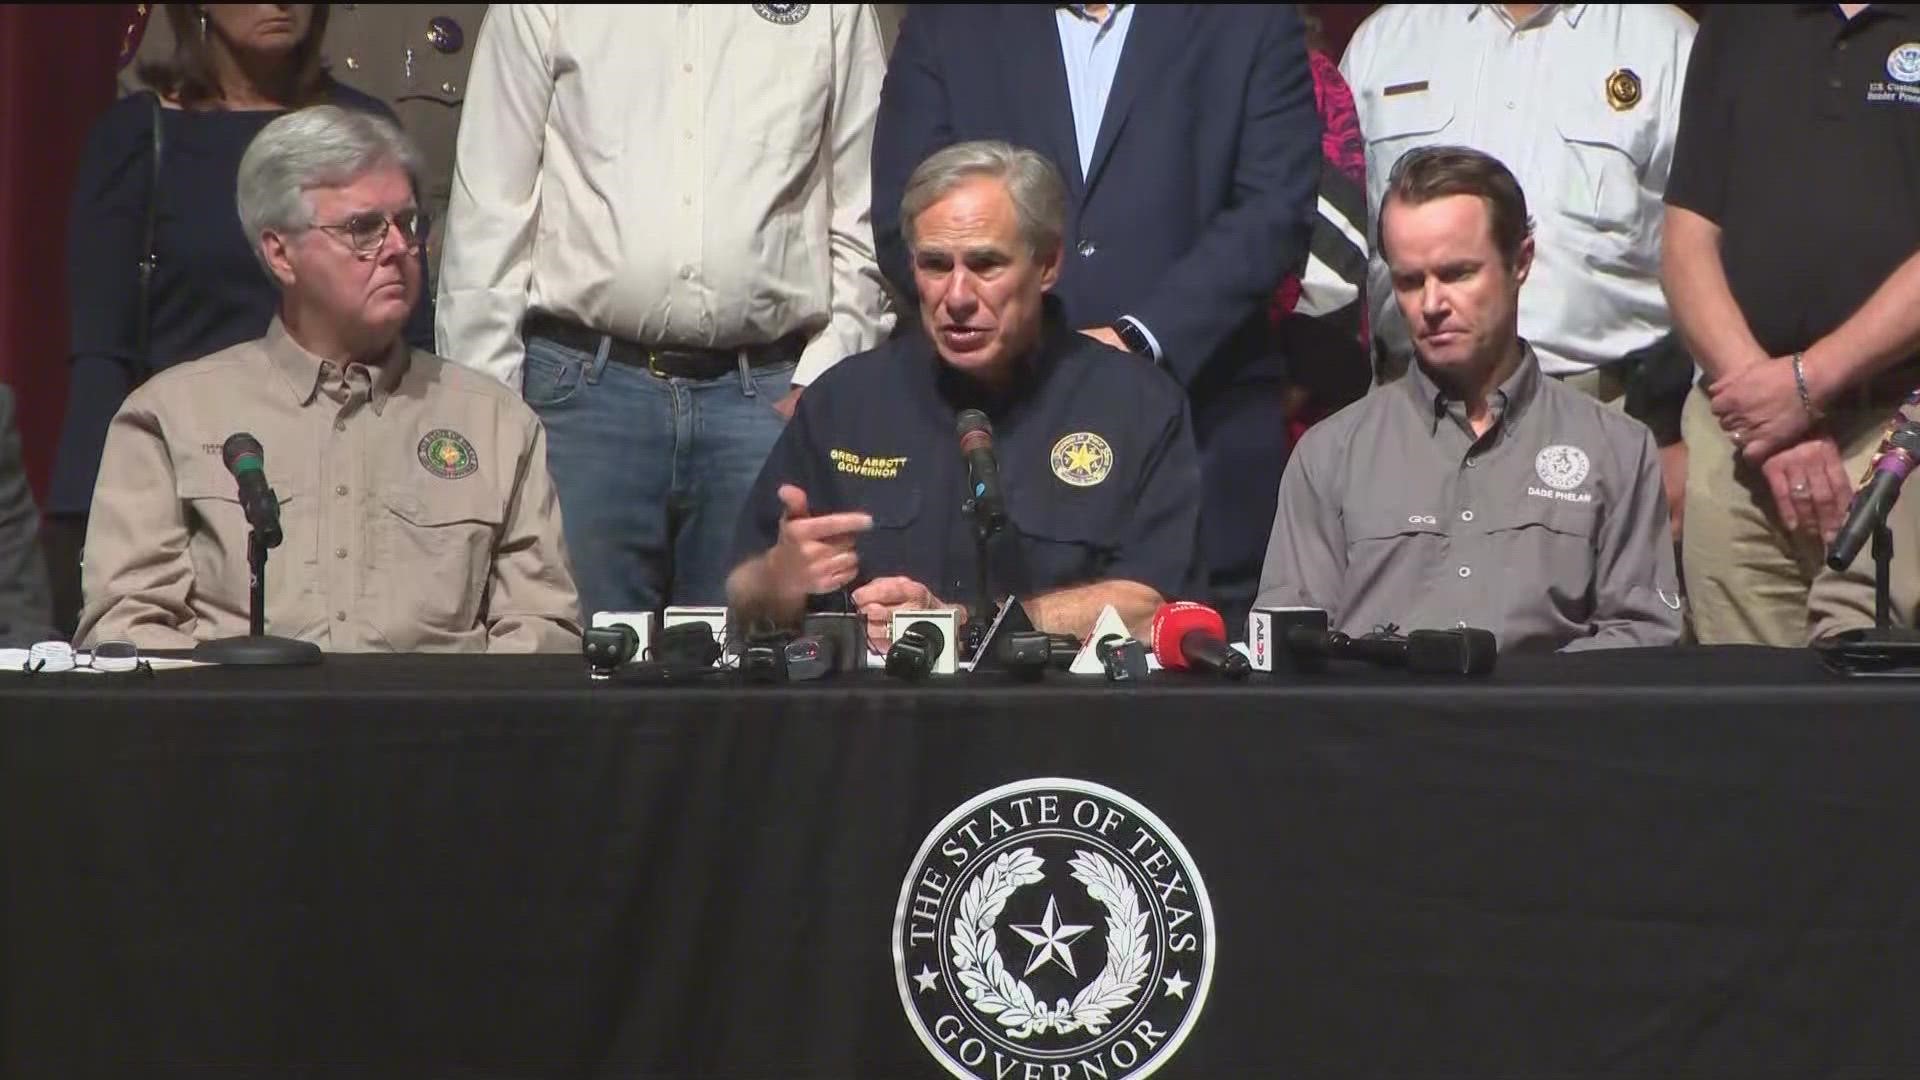 Following the Uvalde shooting, Gov. Abbott mentioned the 17 bills he signed in 2019 after the 2018 mass shooting at Santa Fe High School. We have a look at them.